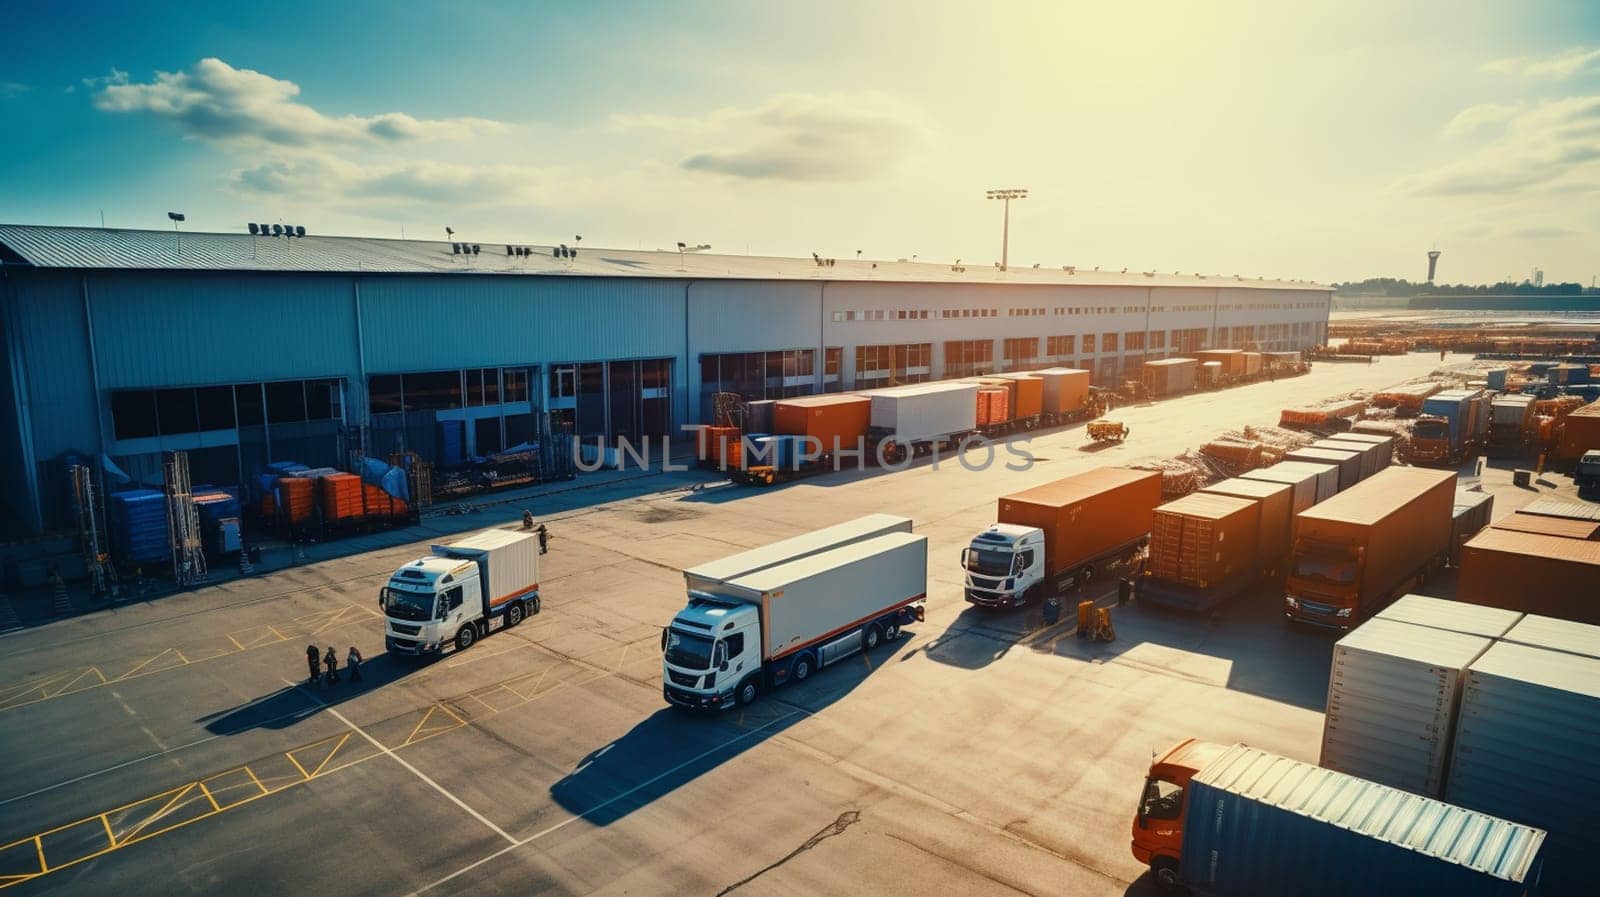 Logistics park with warehouse, loading hub and many semi trucks with cargo trailers standing at the ramps for load unload goods at sunset. . High quality photo